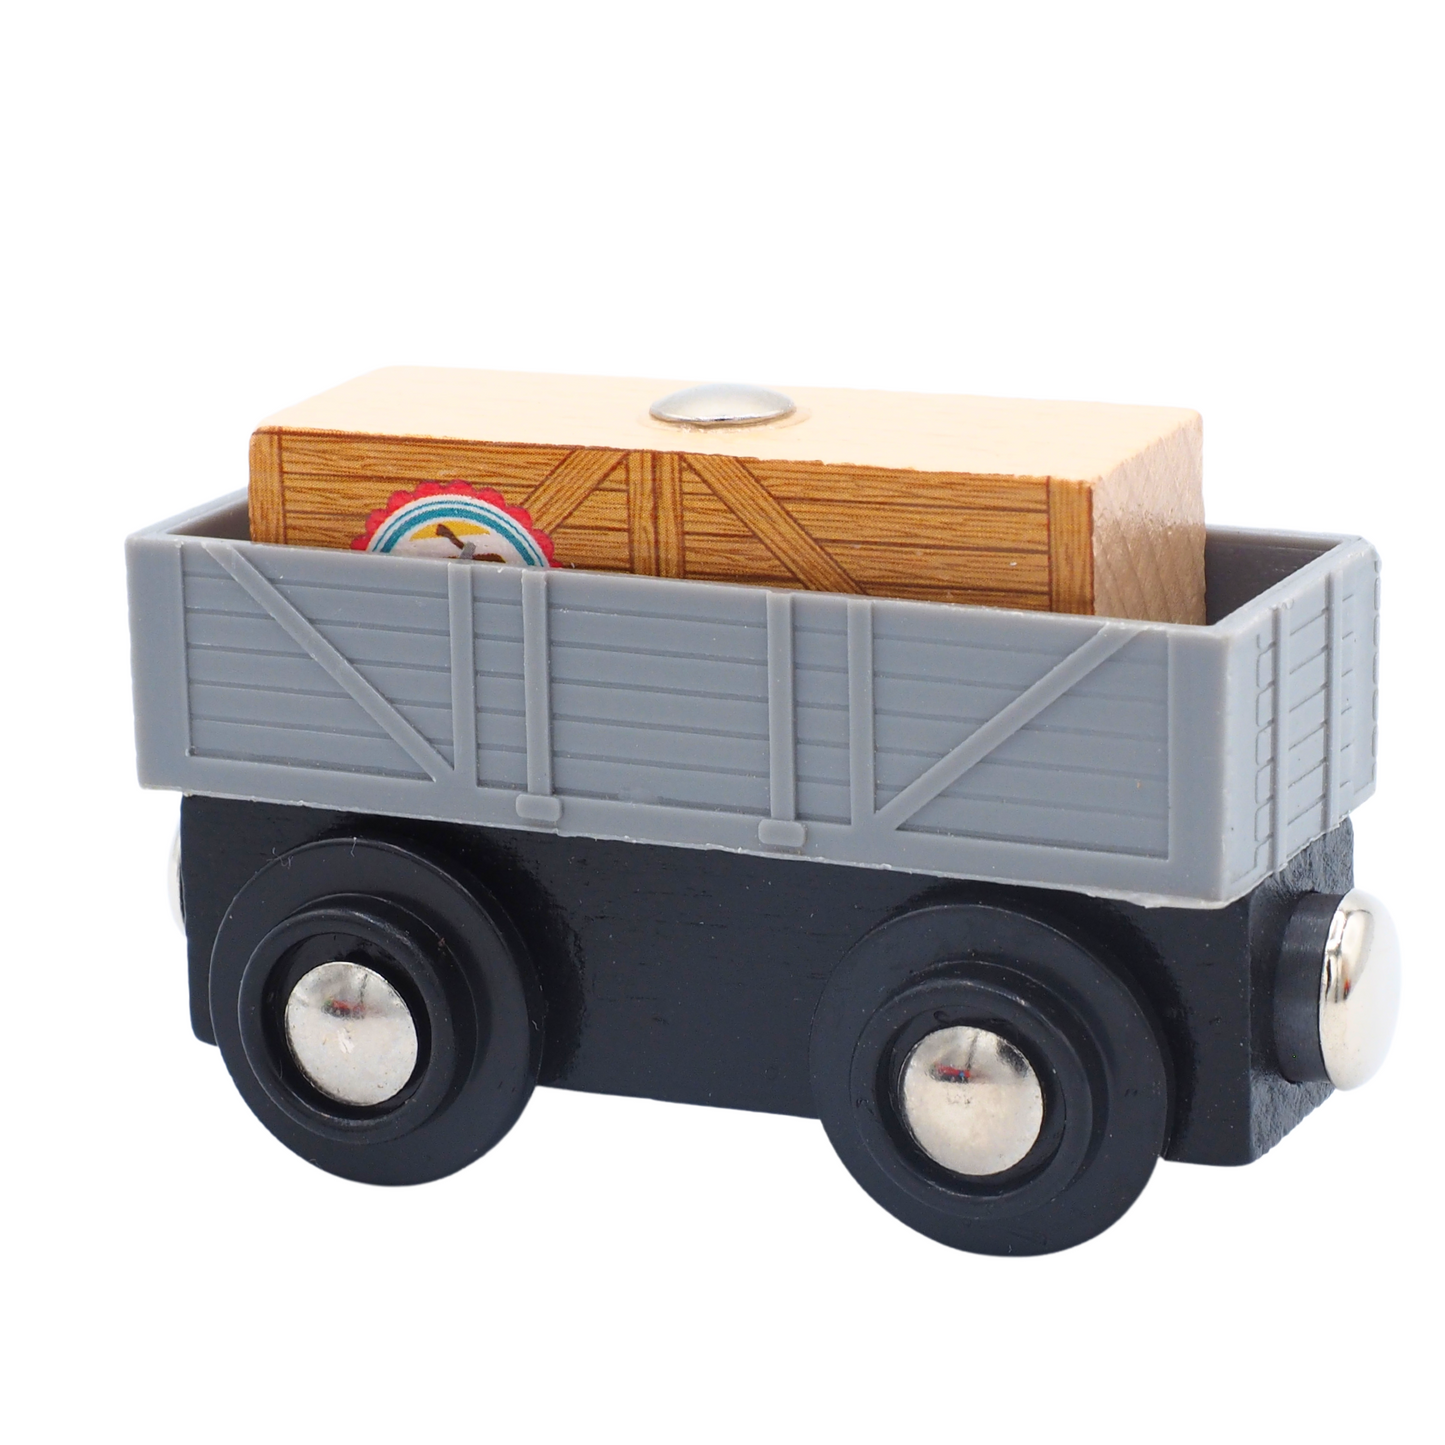 6 pack of Wooden Tenders for Wooden Train Tracks